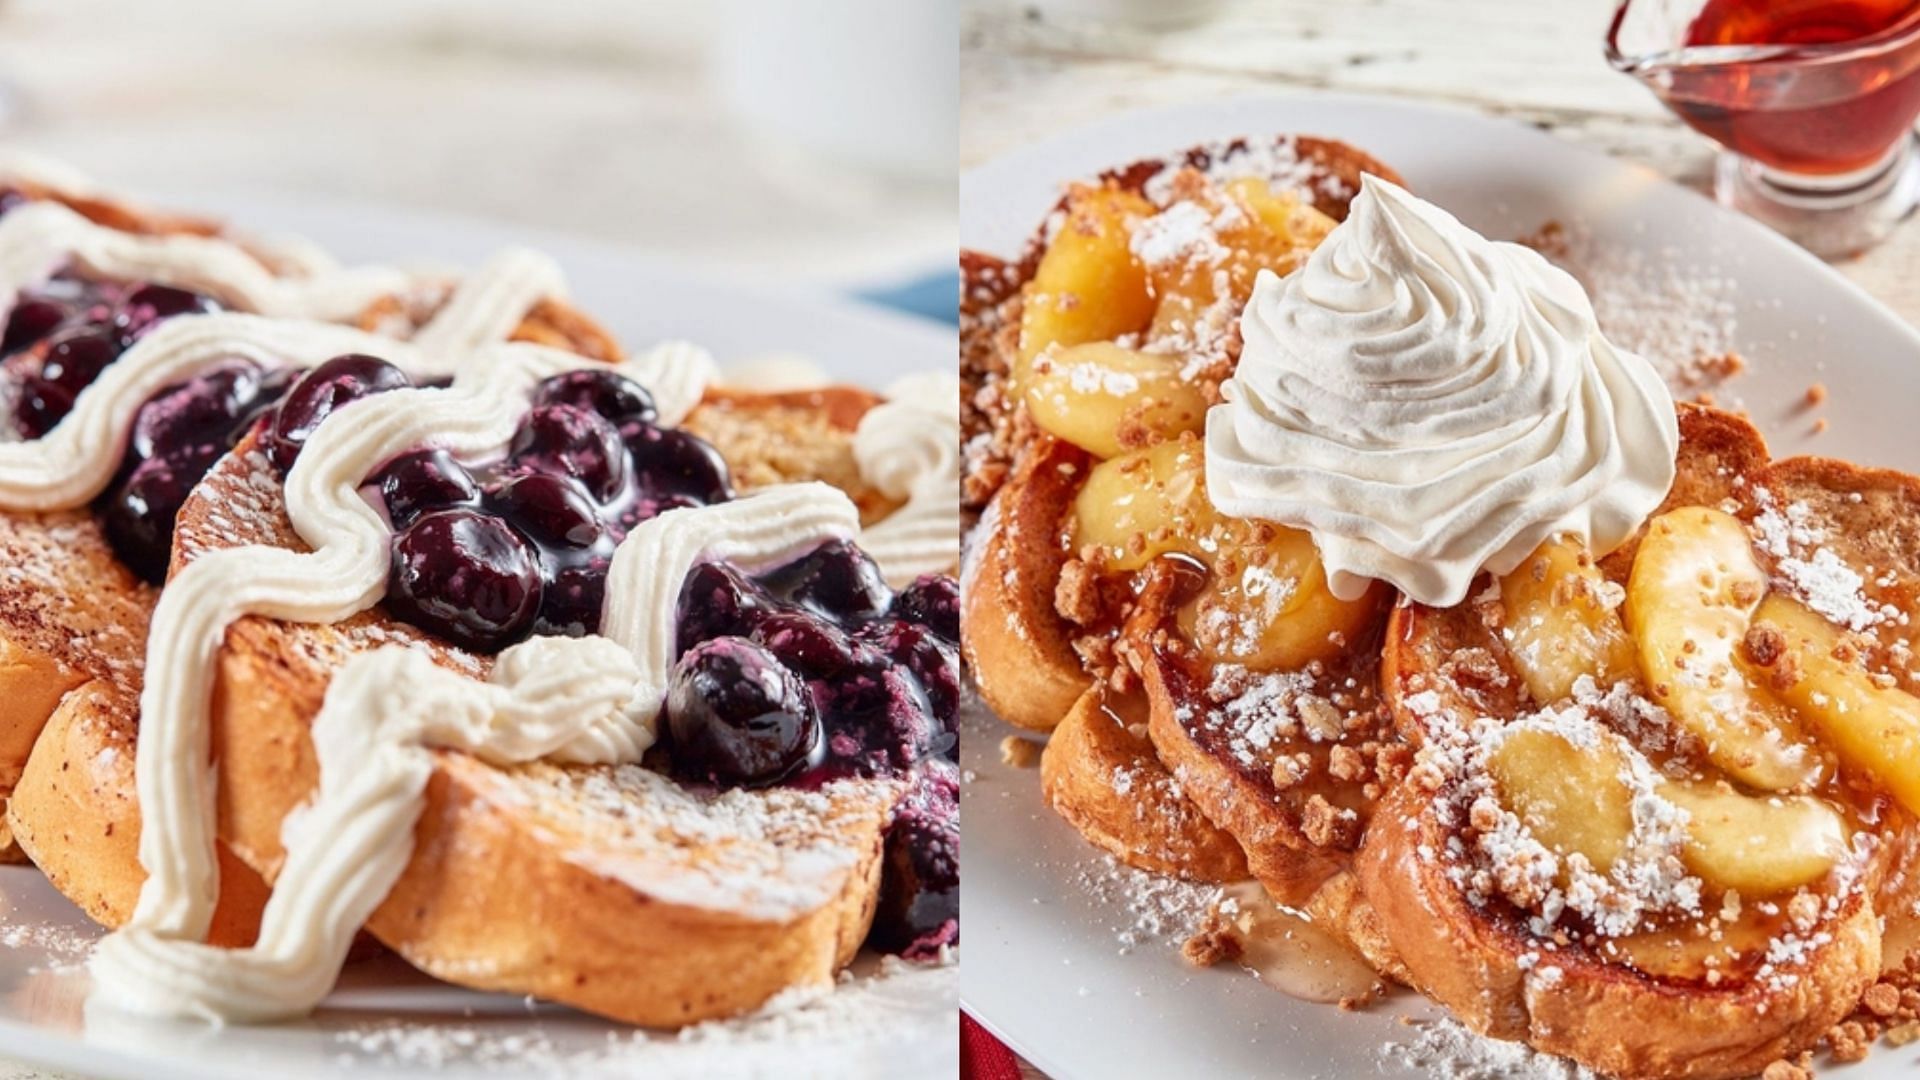 Blueberry Cheesecake Topped French Toast and the Apple Streusel Topped French Toast from the returning Sweet &amp; Savory French Toast line-up (Image via Huddle House)